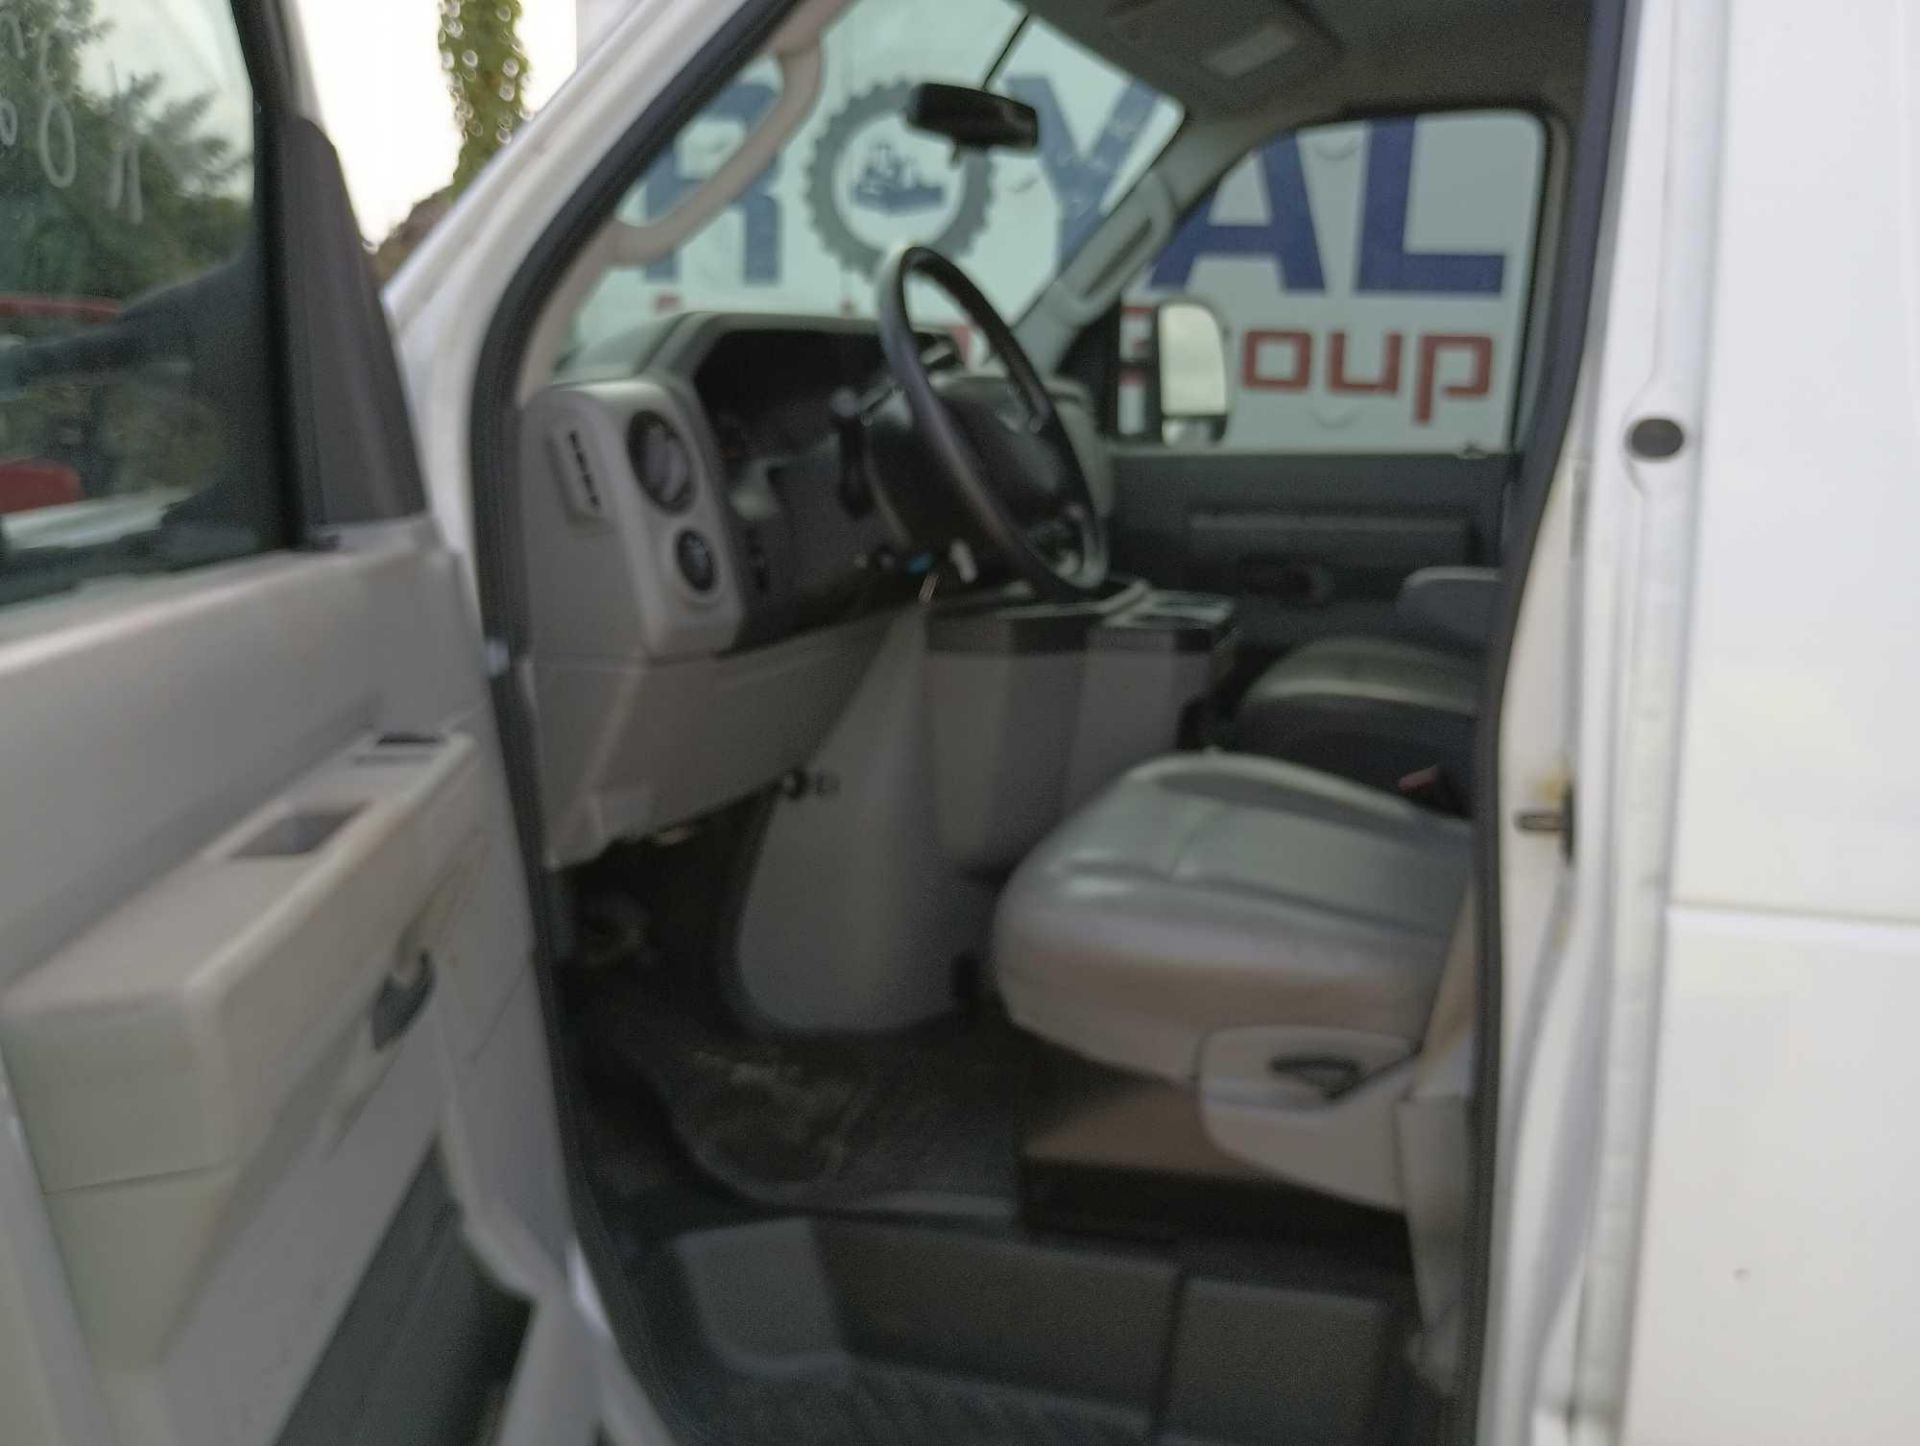 2014 Ford E350 Extended Cargo Van - Image 10 of 24